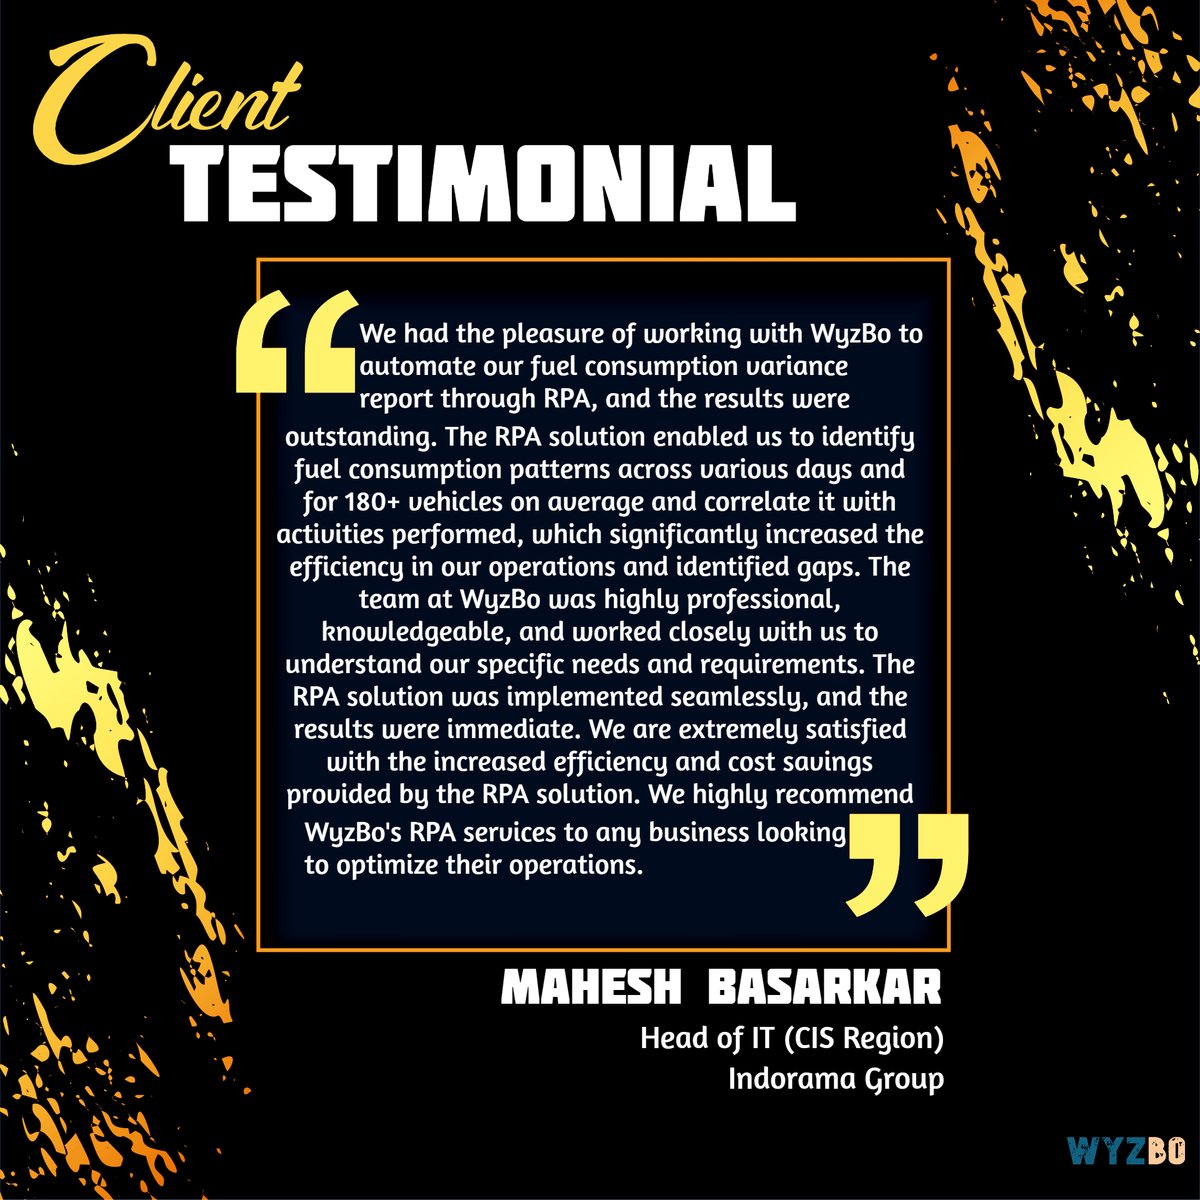 Client spotlight: Mr. Basarkar shares their journey with software automation. Discover how our solutions made a difference in their business.

#ClientTestimonial #SoftwareAutomationJourney #testimonial #customerstory